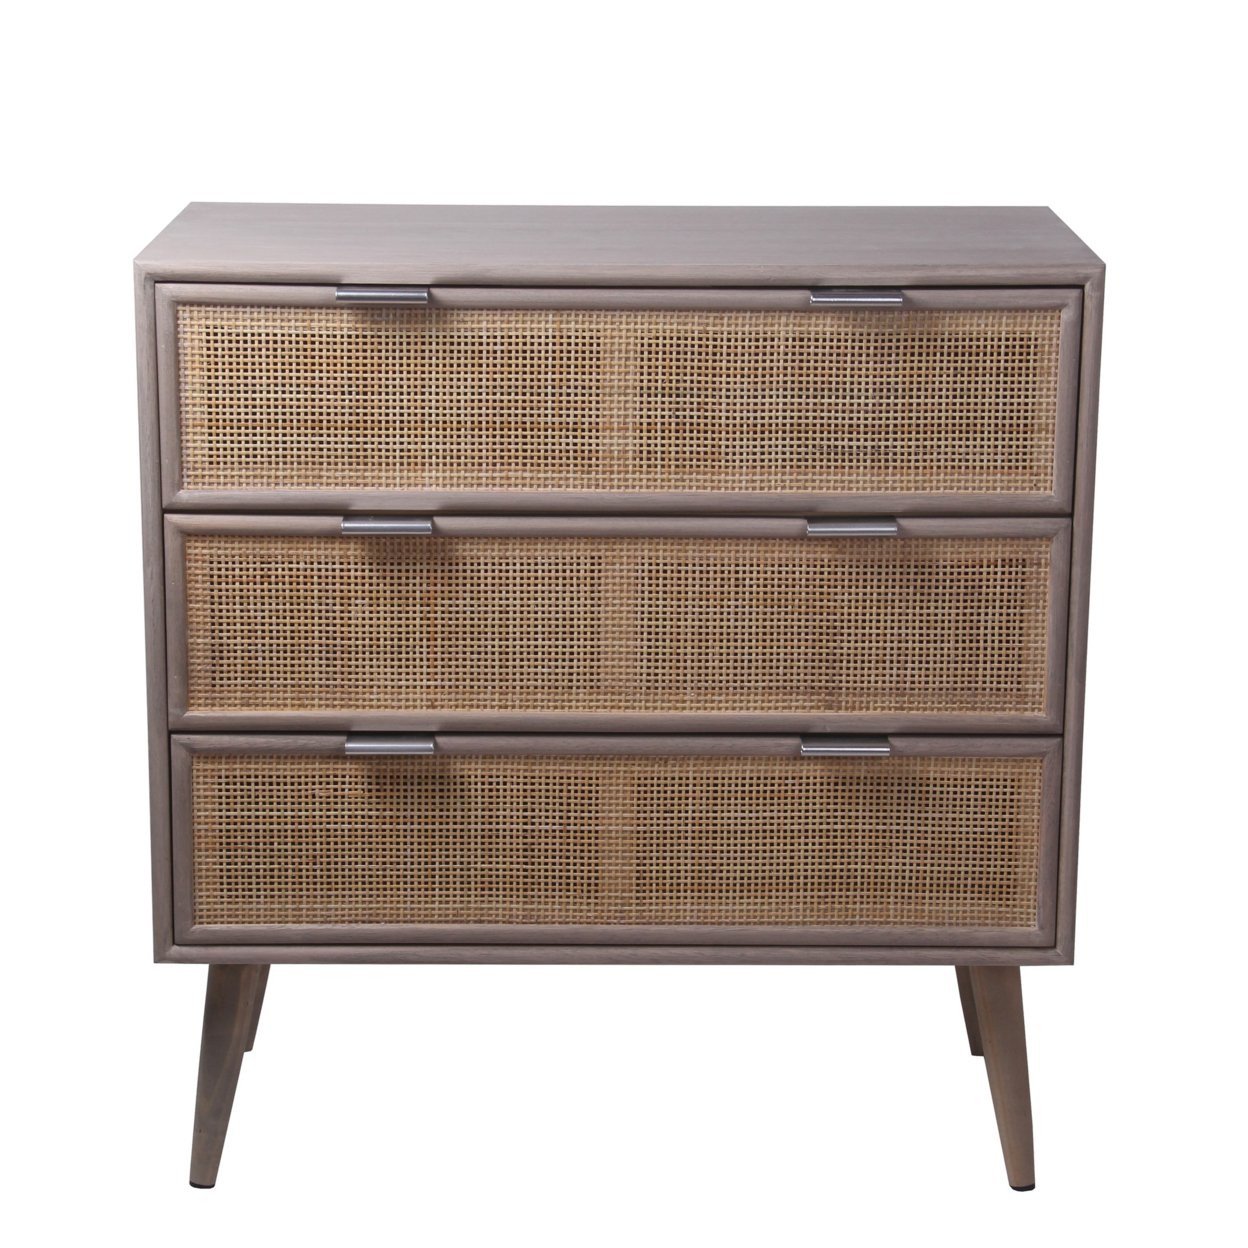 3 Drawer Wooden Accent Chest With Mesh Pattern Front, Gray And Brown- Saltoro Sherpi